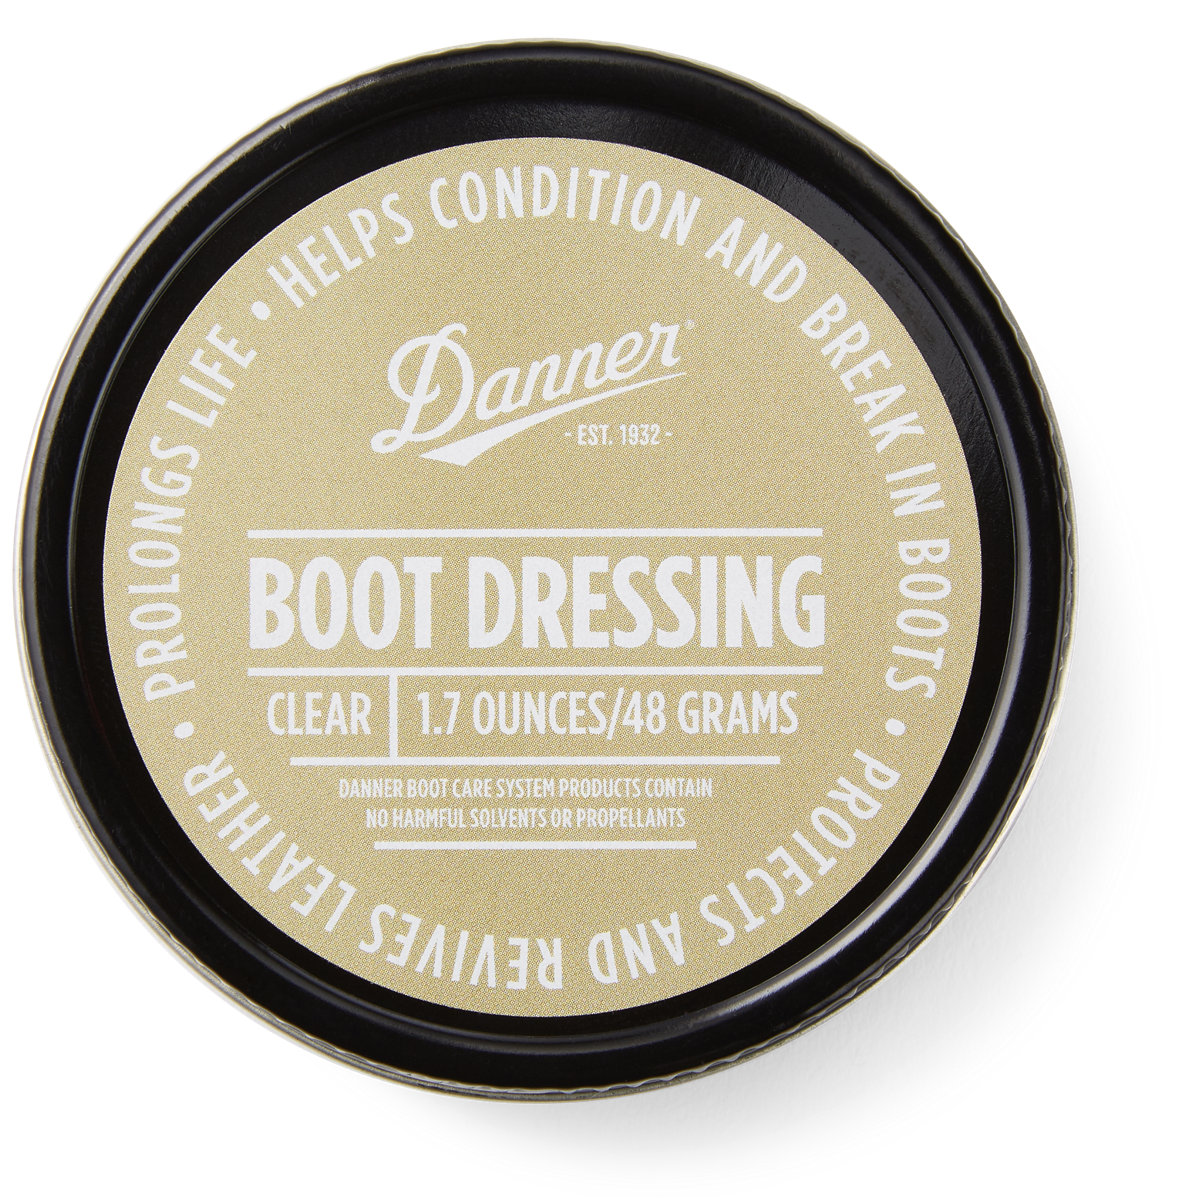 Danner Leather Care Kit